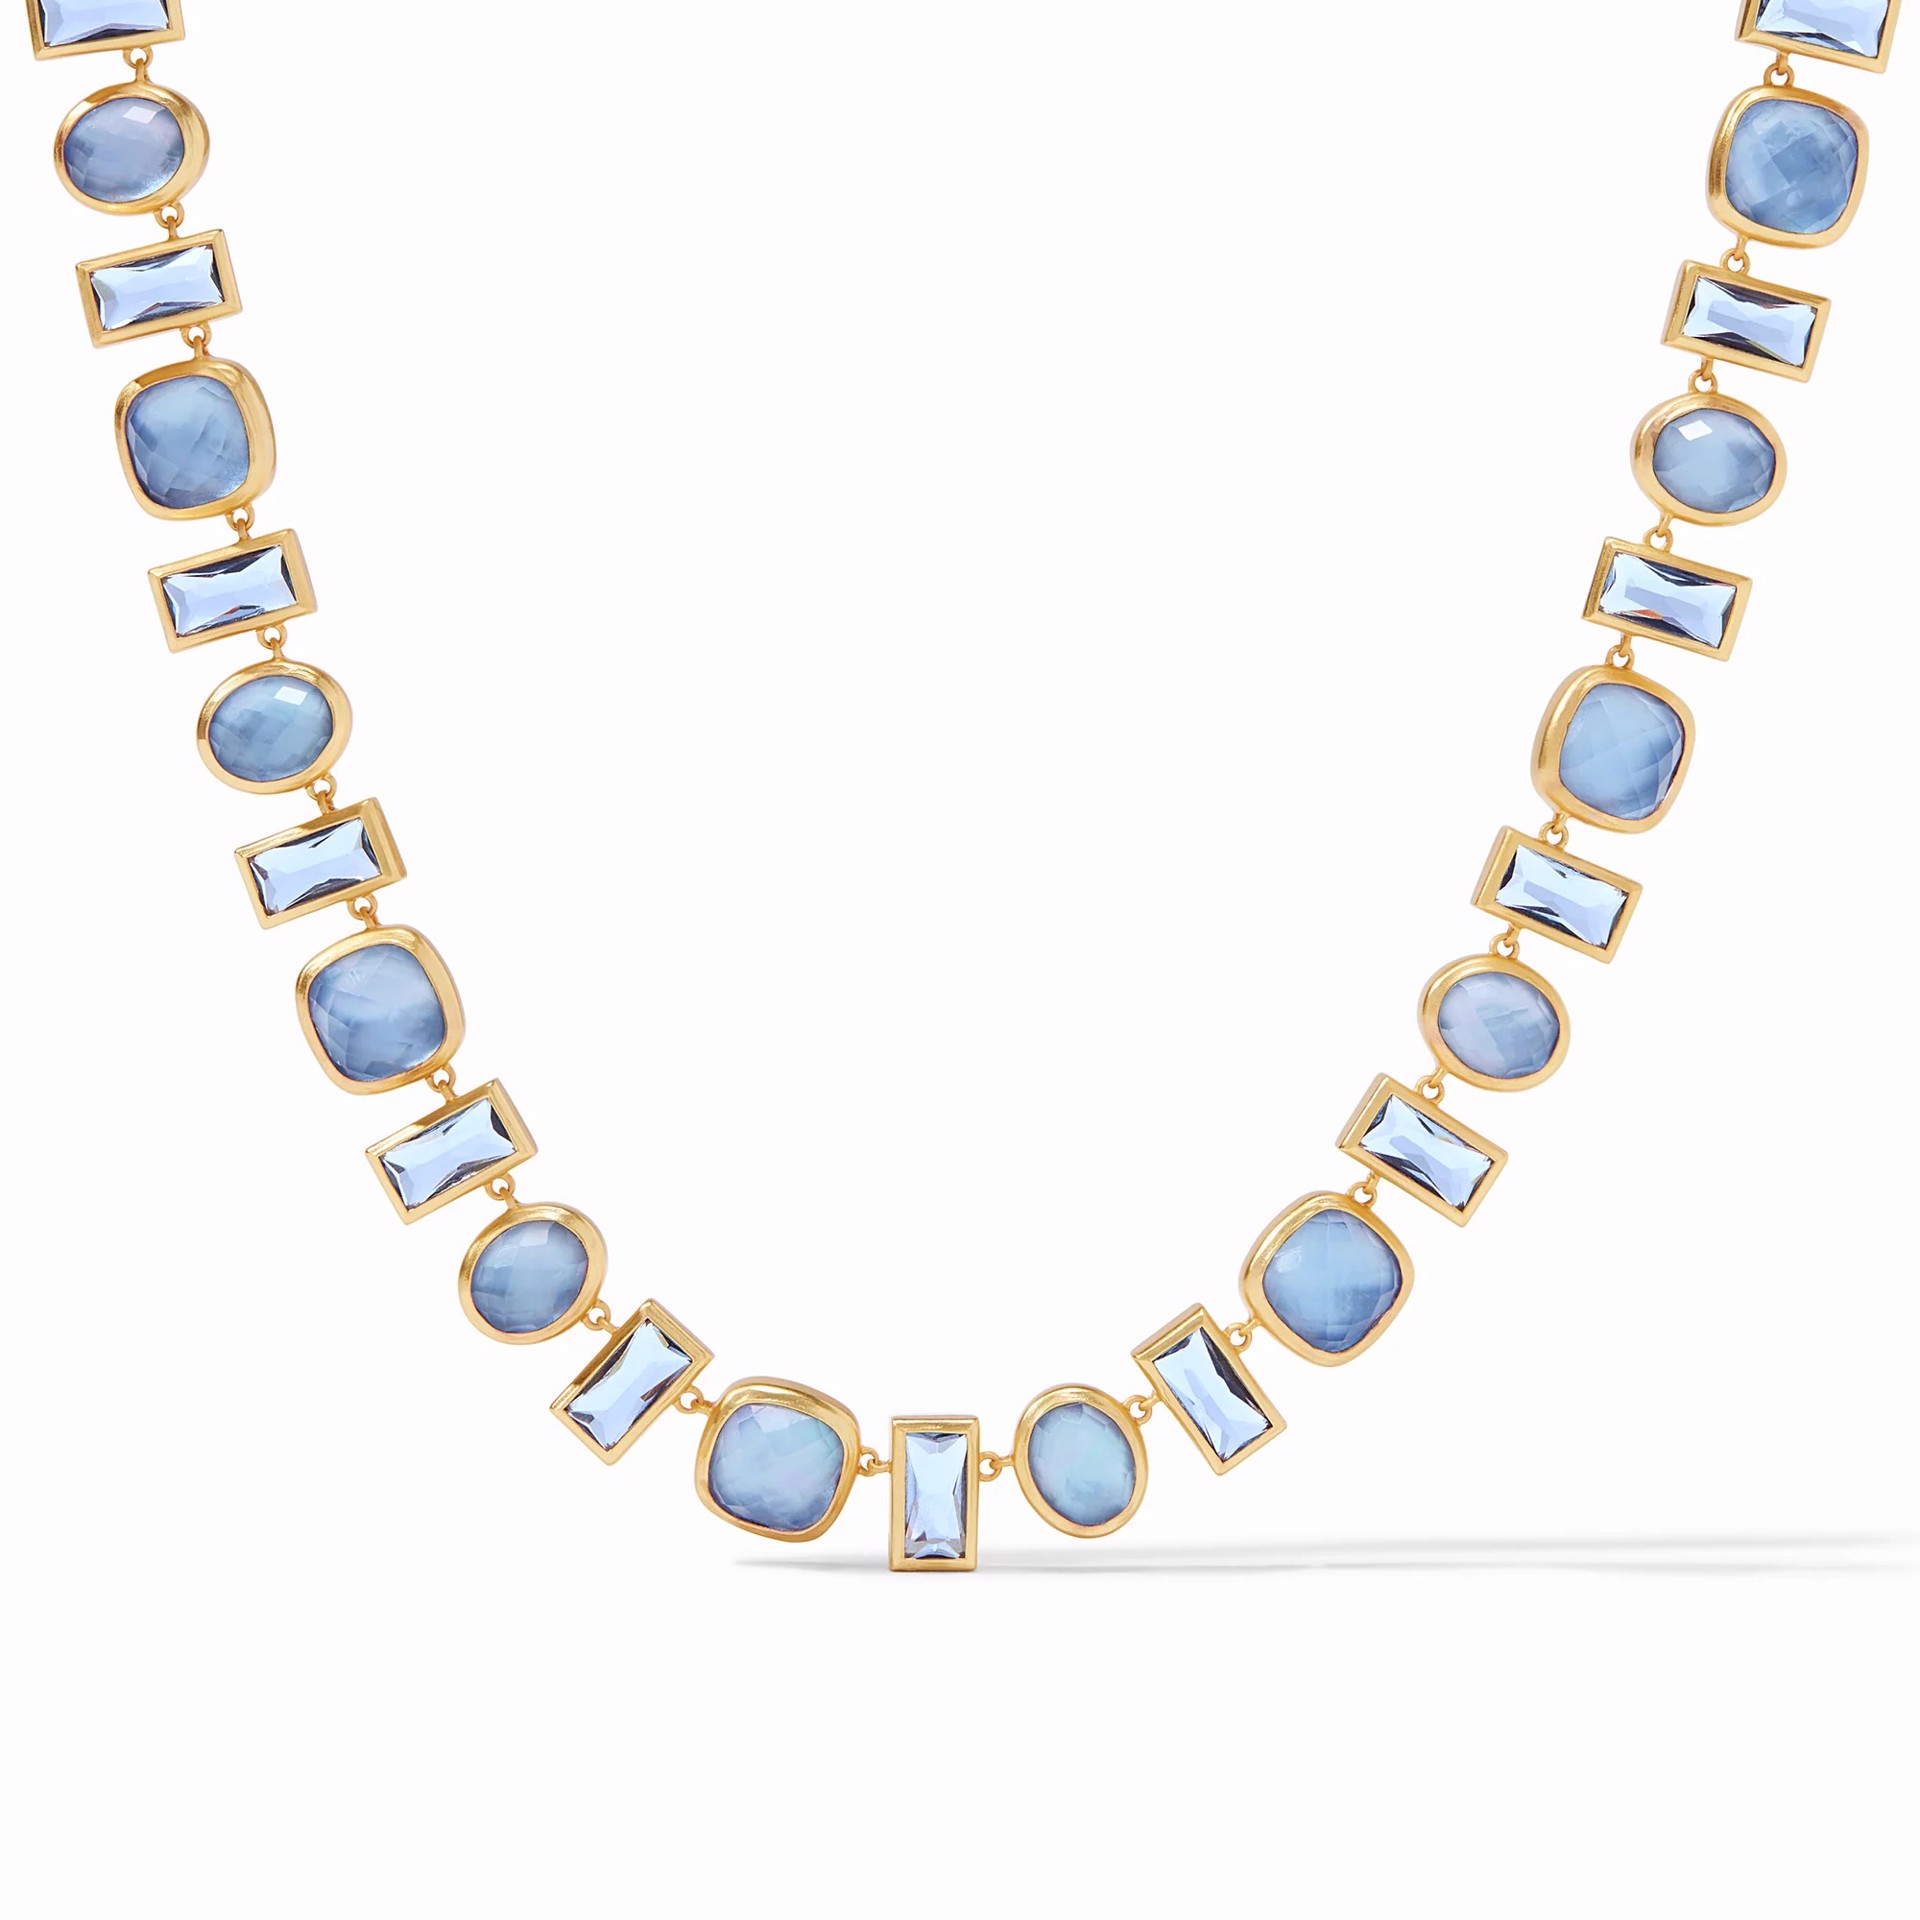 Antonia Tennis Necklace - Chalcedony Blue by Julie Vos